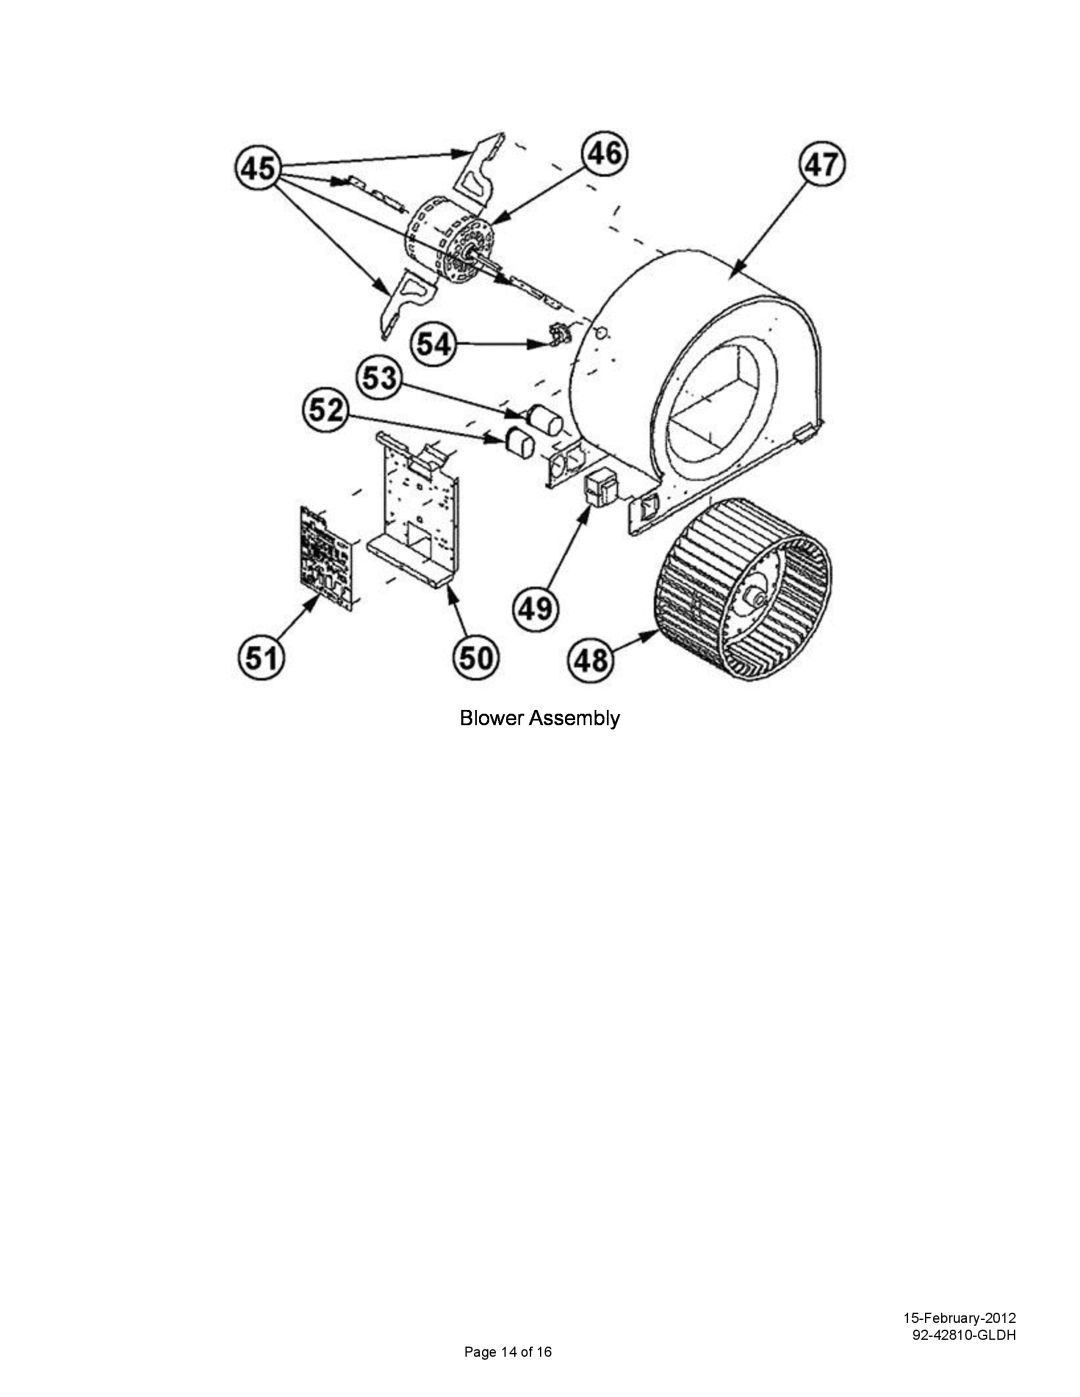 Heat Controller manual Blower Assembly, February-2012 92-42810-GLDH 